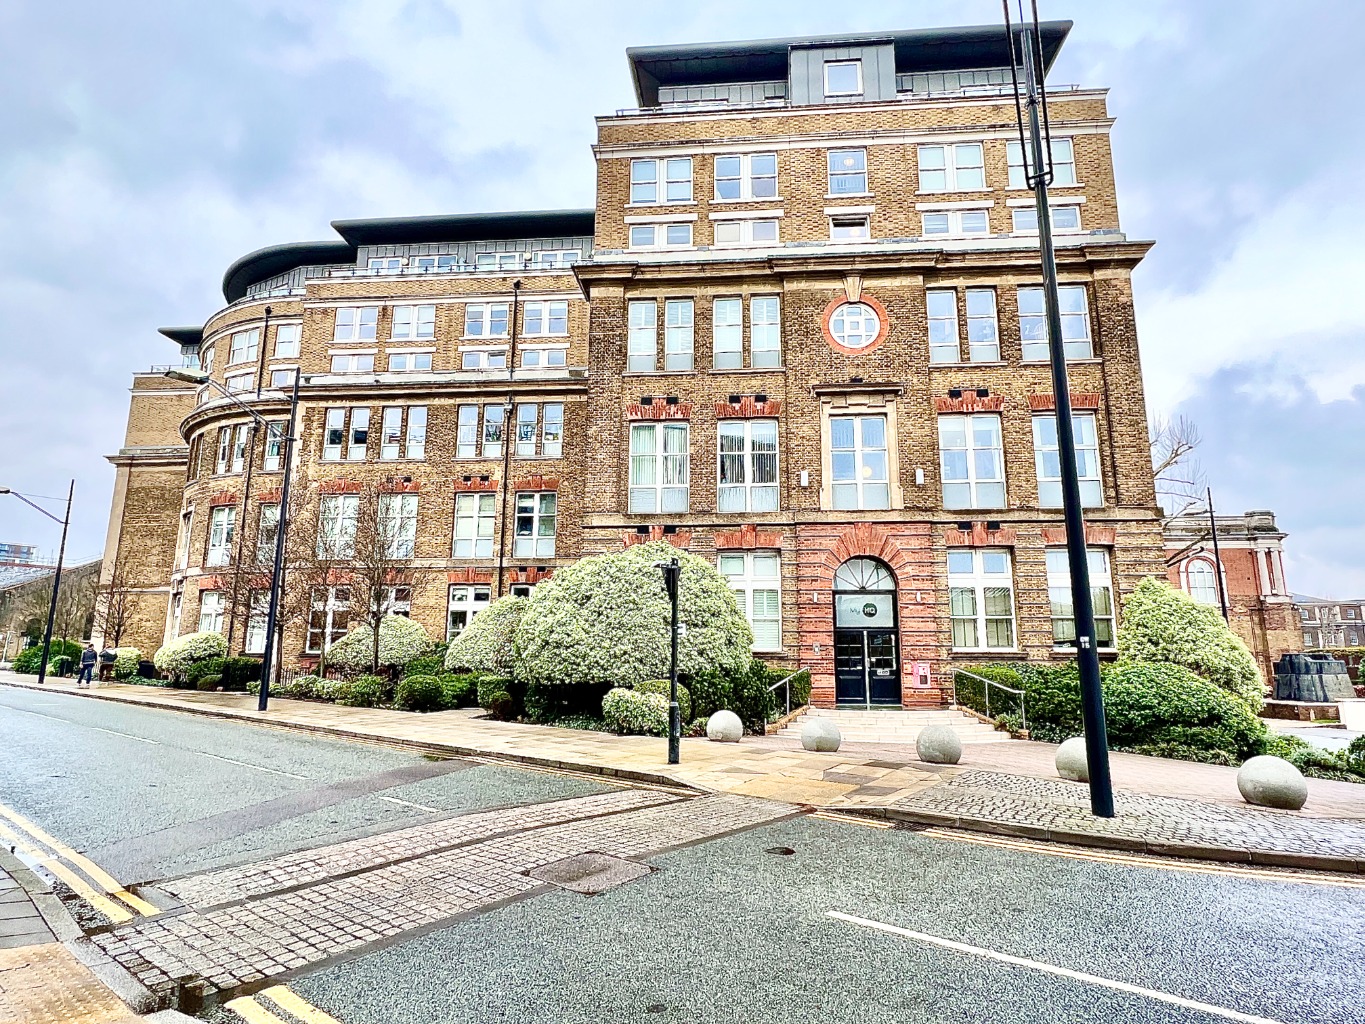 Offered with immediate vacant possession, Beaumont Gibbs are offering this lovely two double bedroomed second floor duplex apartment for sale in Building 22, Cadogan Road. Offering spacious accommodation, within this stunning development by Berkeley Homes and situated conveniently to local amenities